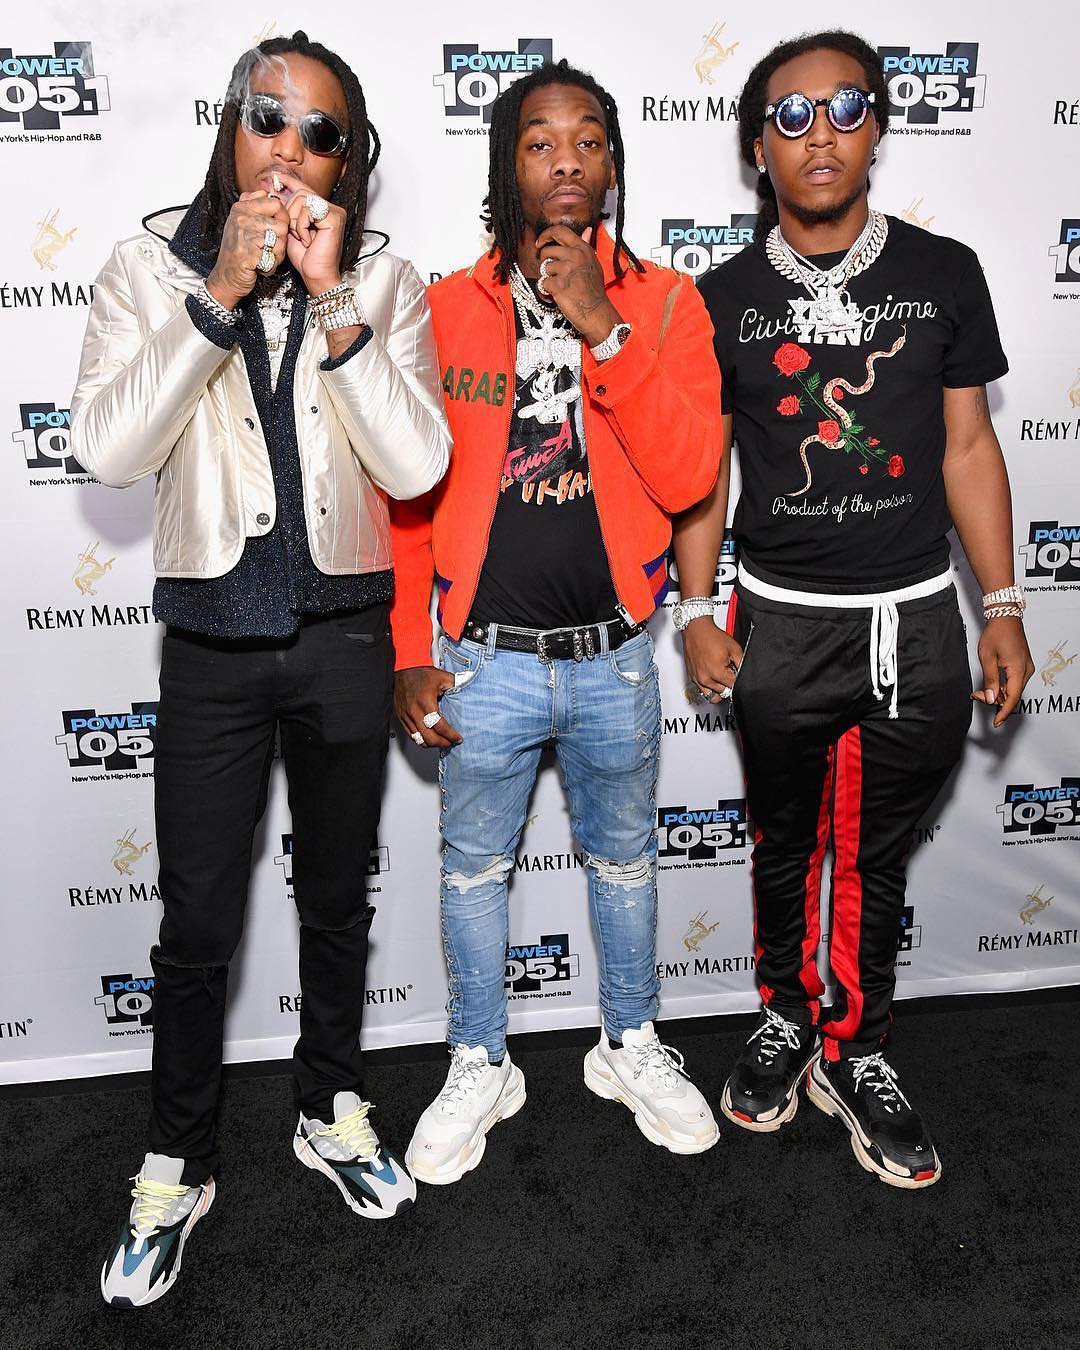 SPOTTED: The Migos Gang in Gucci, Yeezys, Balenciaga and More